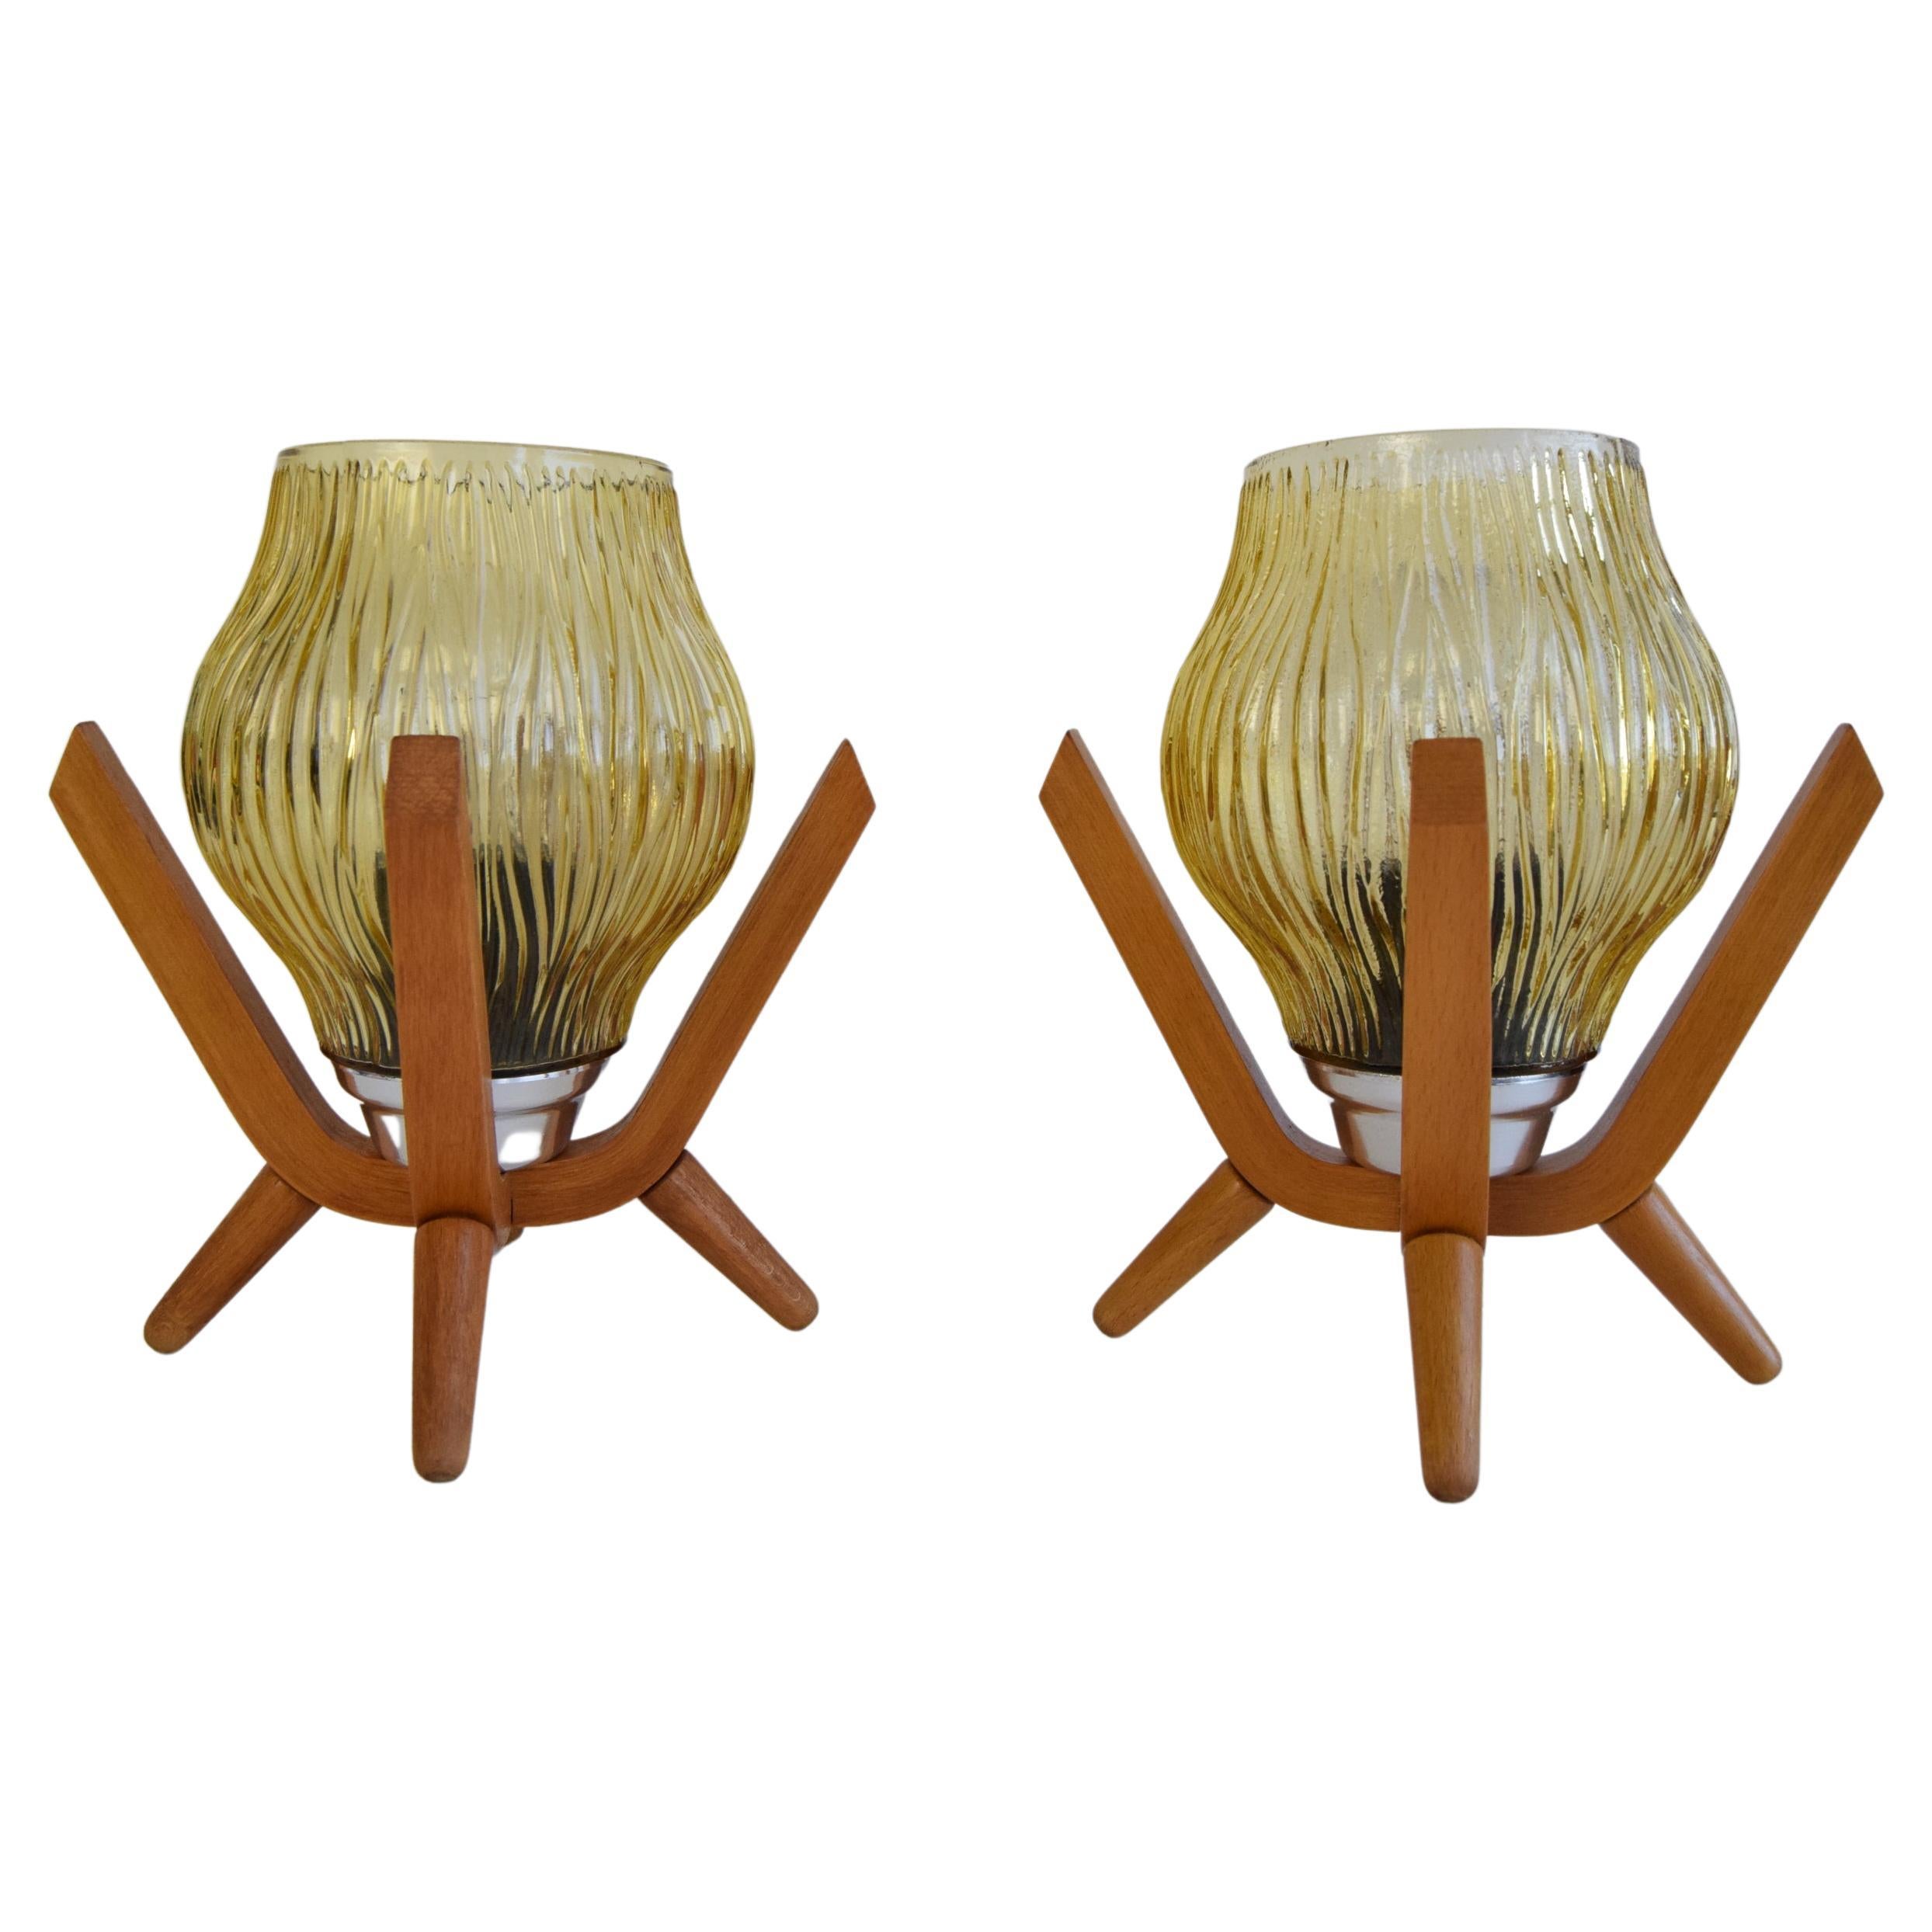 Pair of mid-century Wooden Design Table Lamps, by Dřevo Humpolec, 1970's.  For Sale